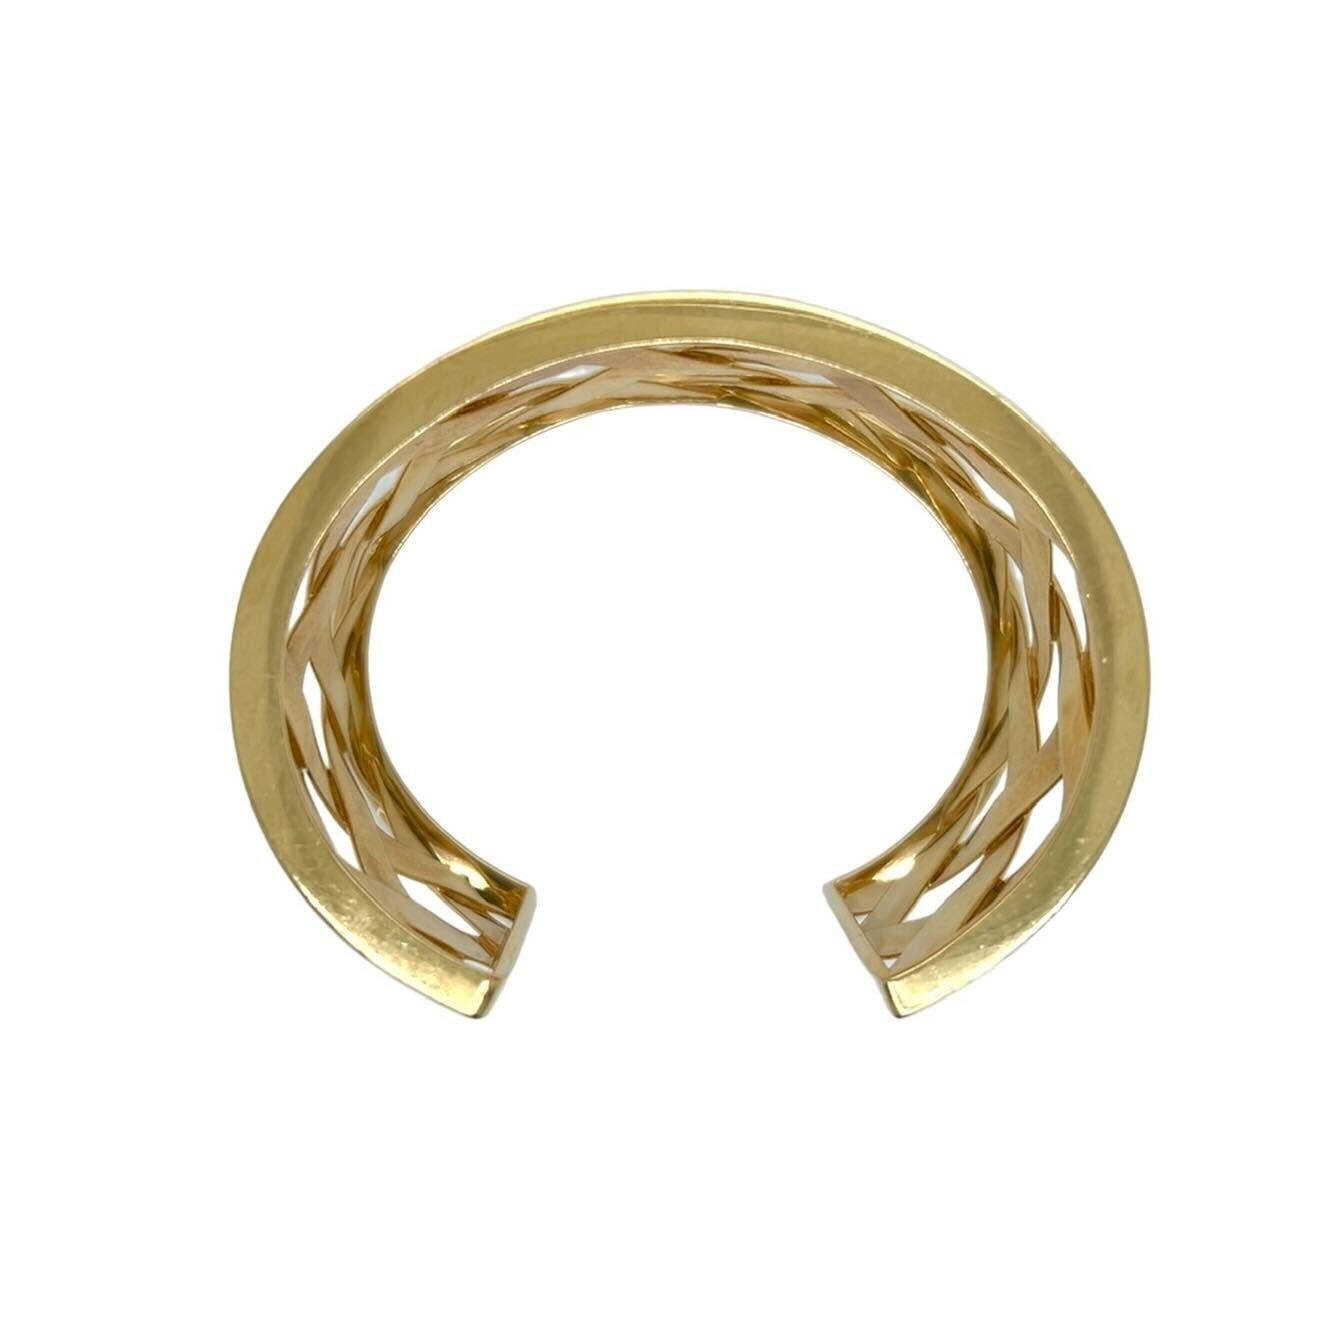 An 18 karat yellow gold bracelet, Verdura.  The “Criss Cross” cuff designed as a wide, open backed cuff of lattice woven gold.  Inner circumference approximately 6 inches.  Gross weight approximately 66.30 grams.  Signed Verdura and hand numbered